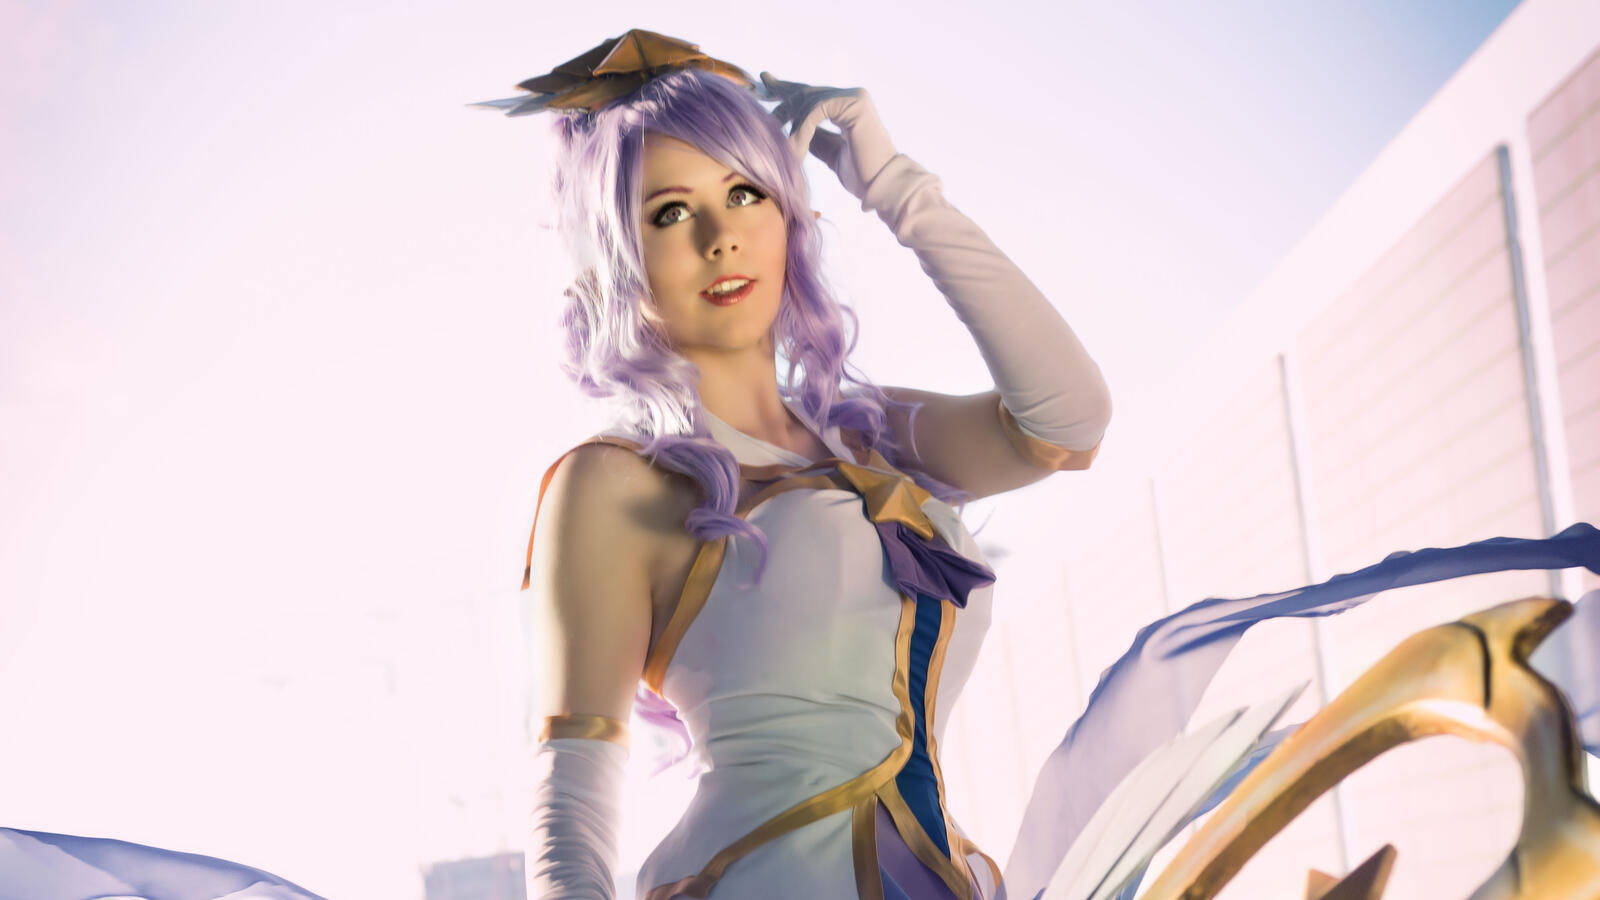 Wallpapers Cosplay the game League Of Legends tank DeviantArt on the desktop